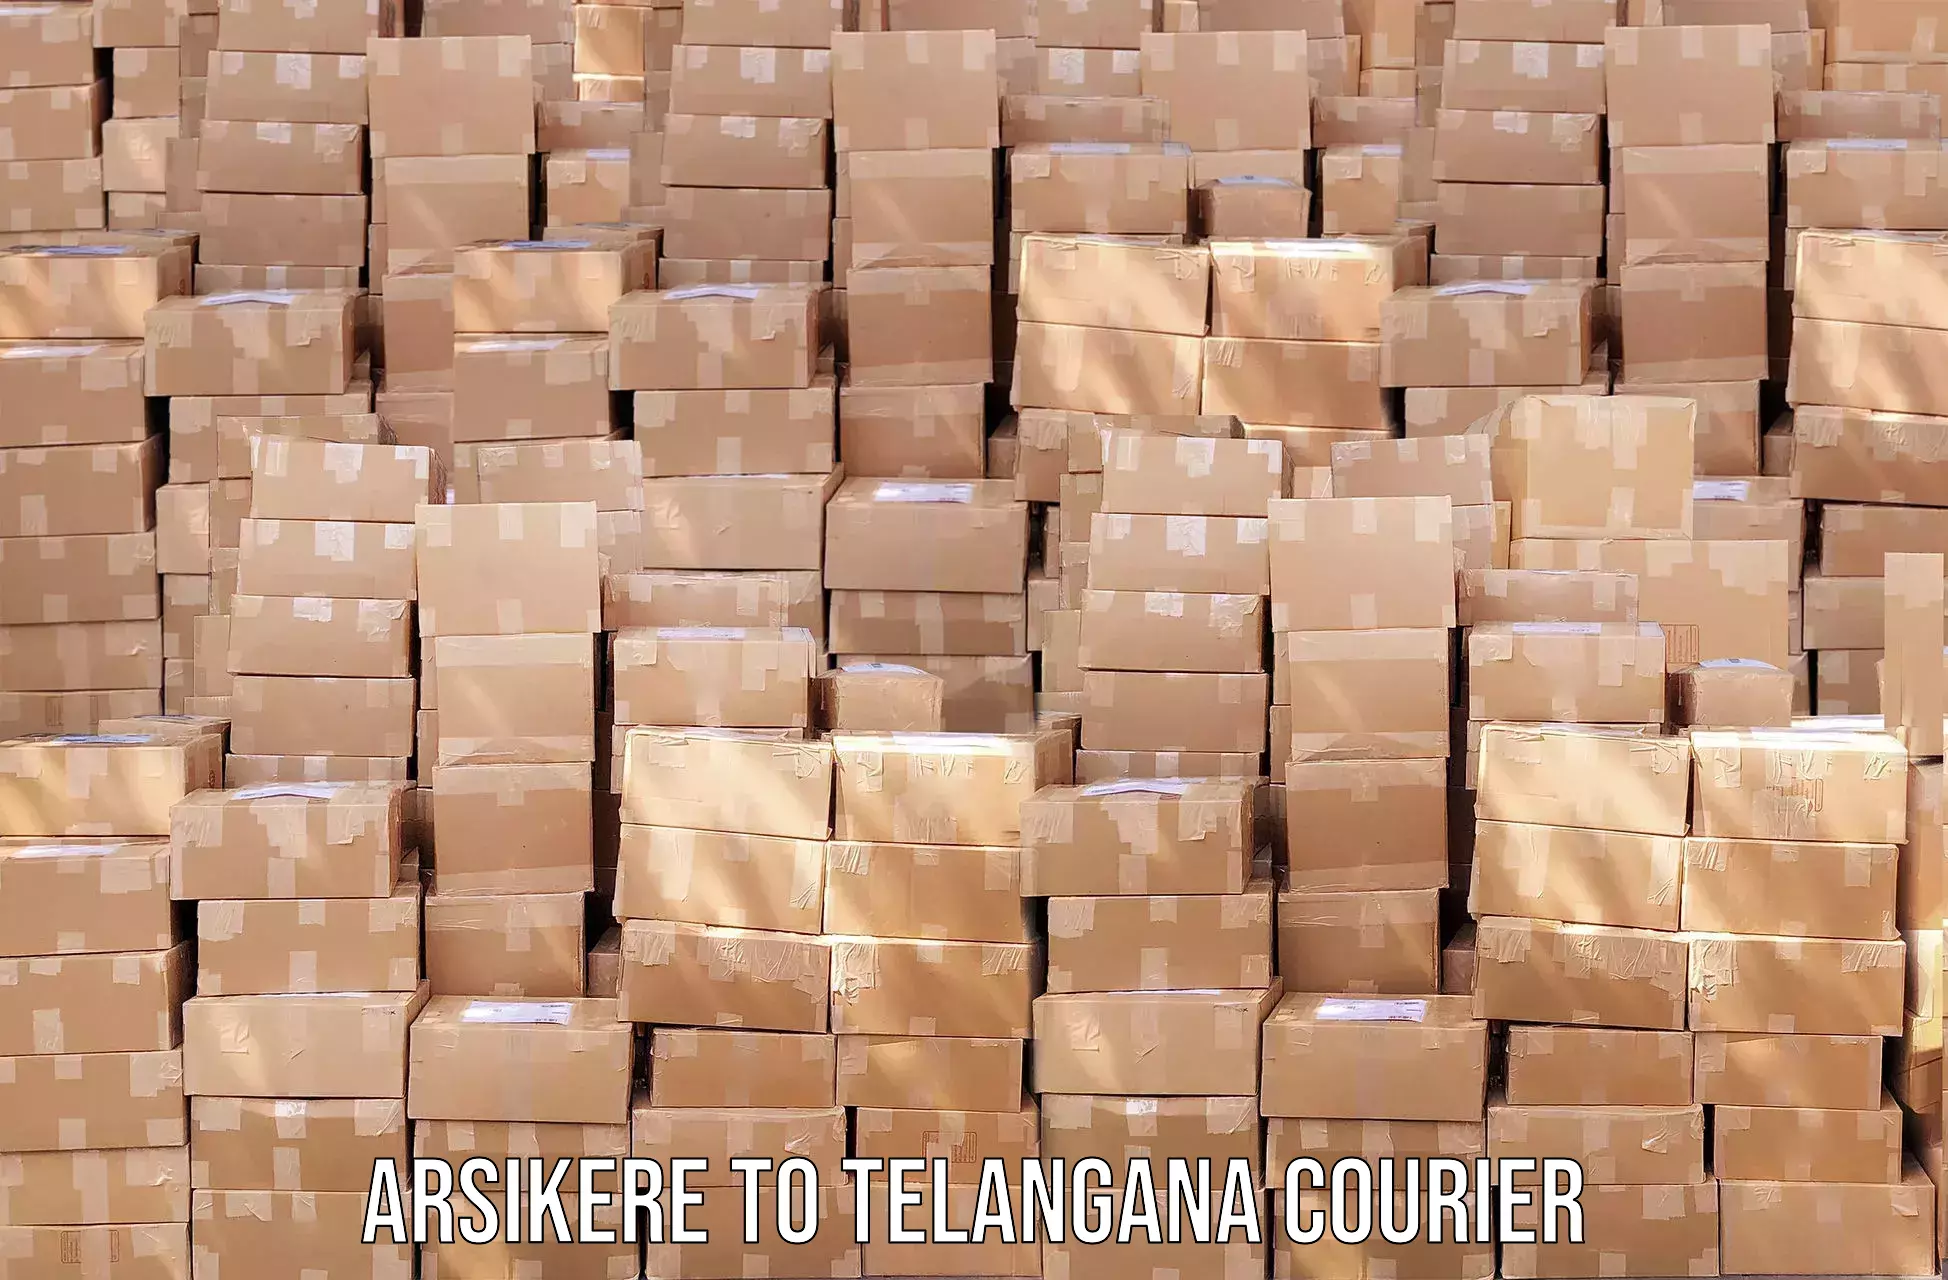 Courier service partnerships Arsikere to Kamareddy